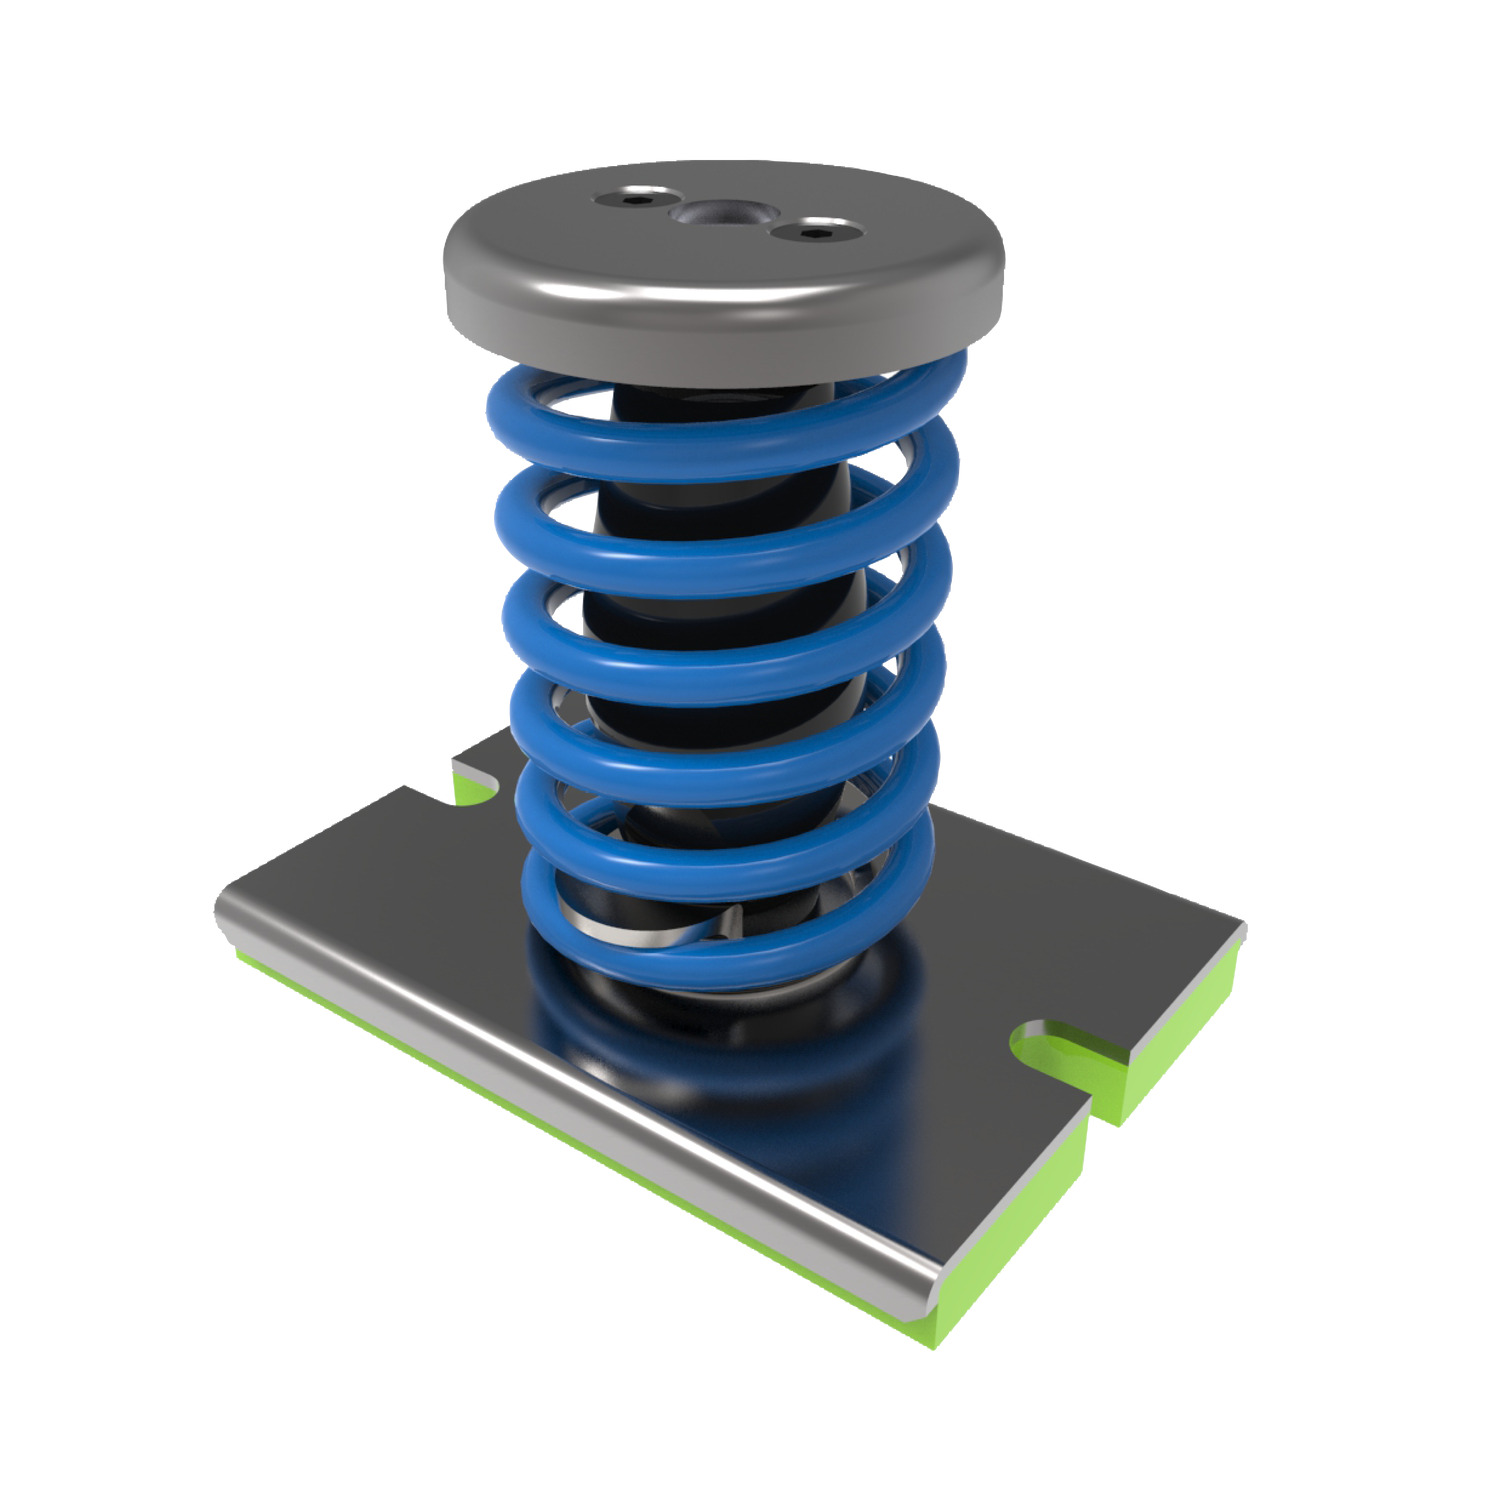 Spring Vibration Damper one spring For machines that need to be isolated from the floor at very low frequency. Loads of up to 15 tonnes per mount and are available in steel with a sylomer pad.